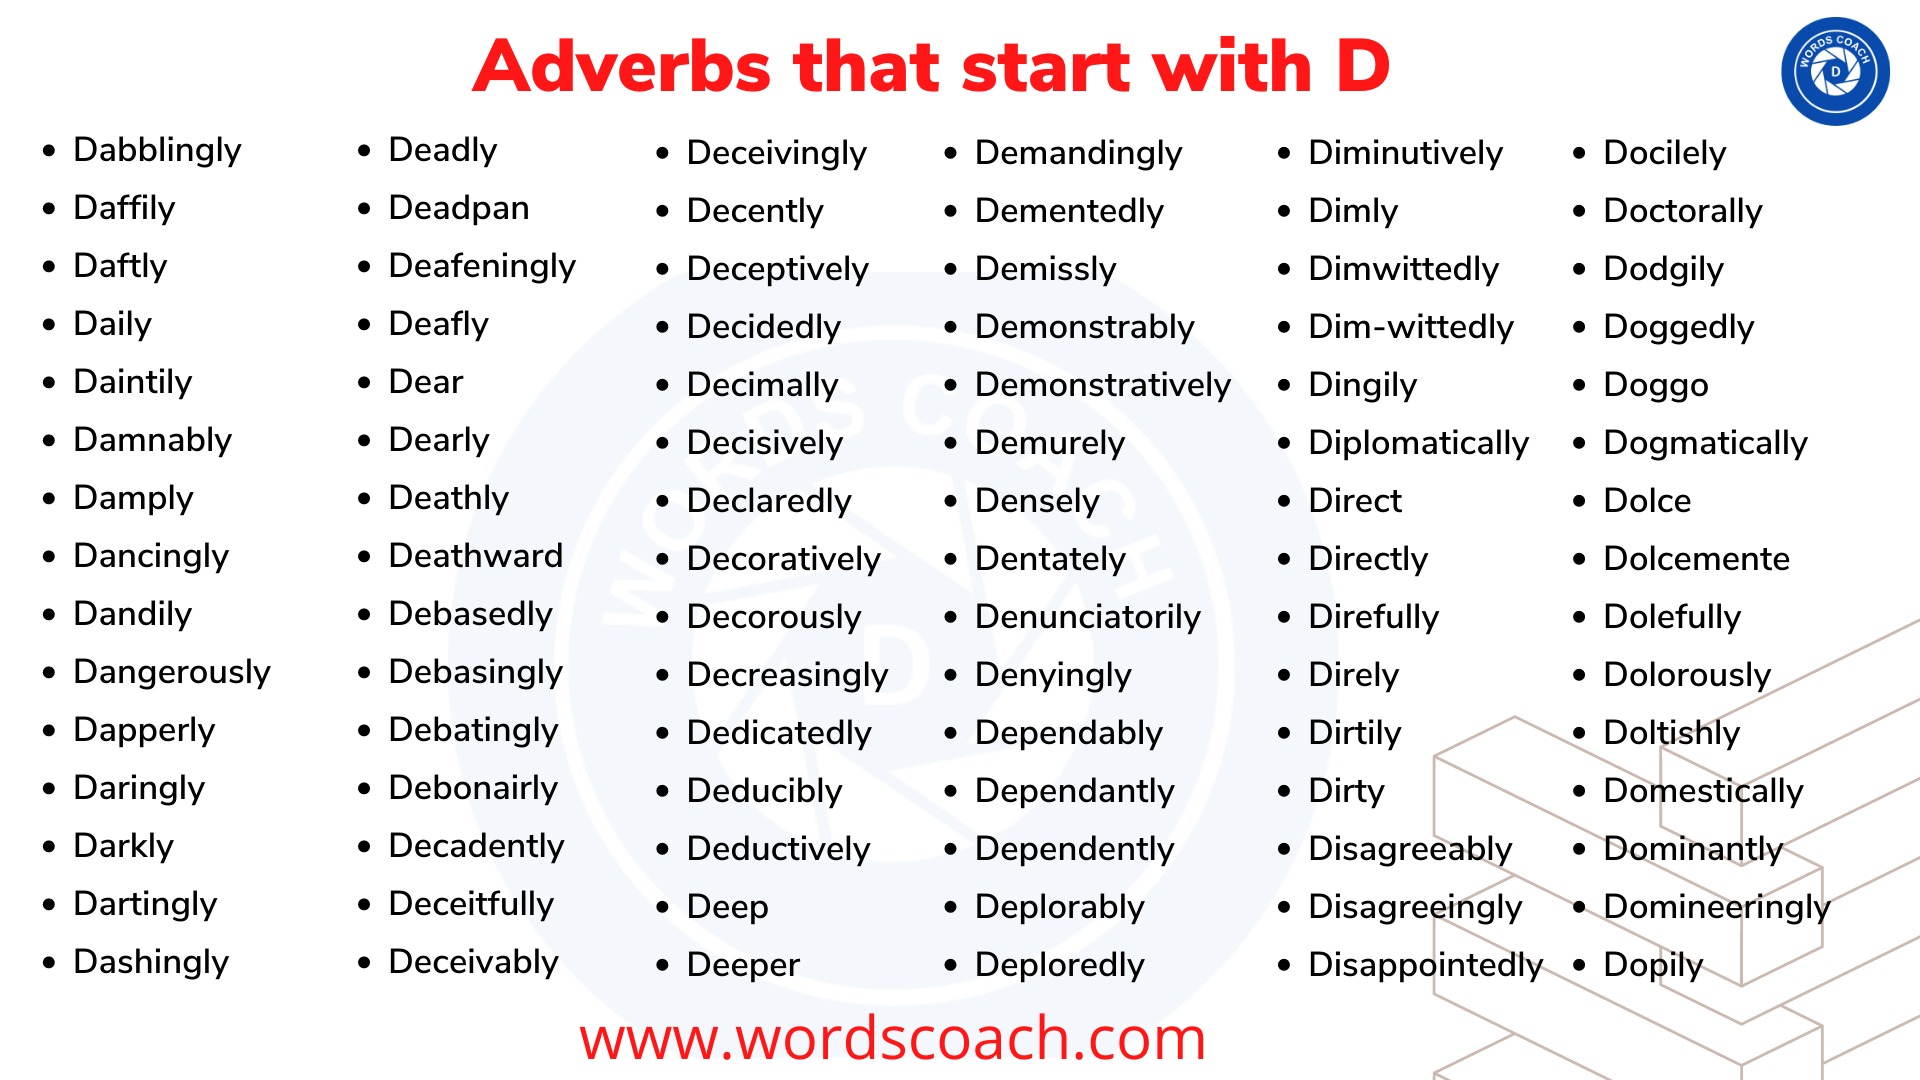 Adverbs that start with D - wordscoach.com